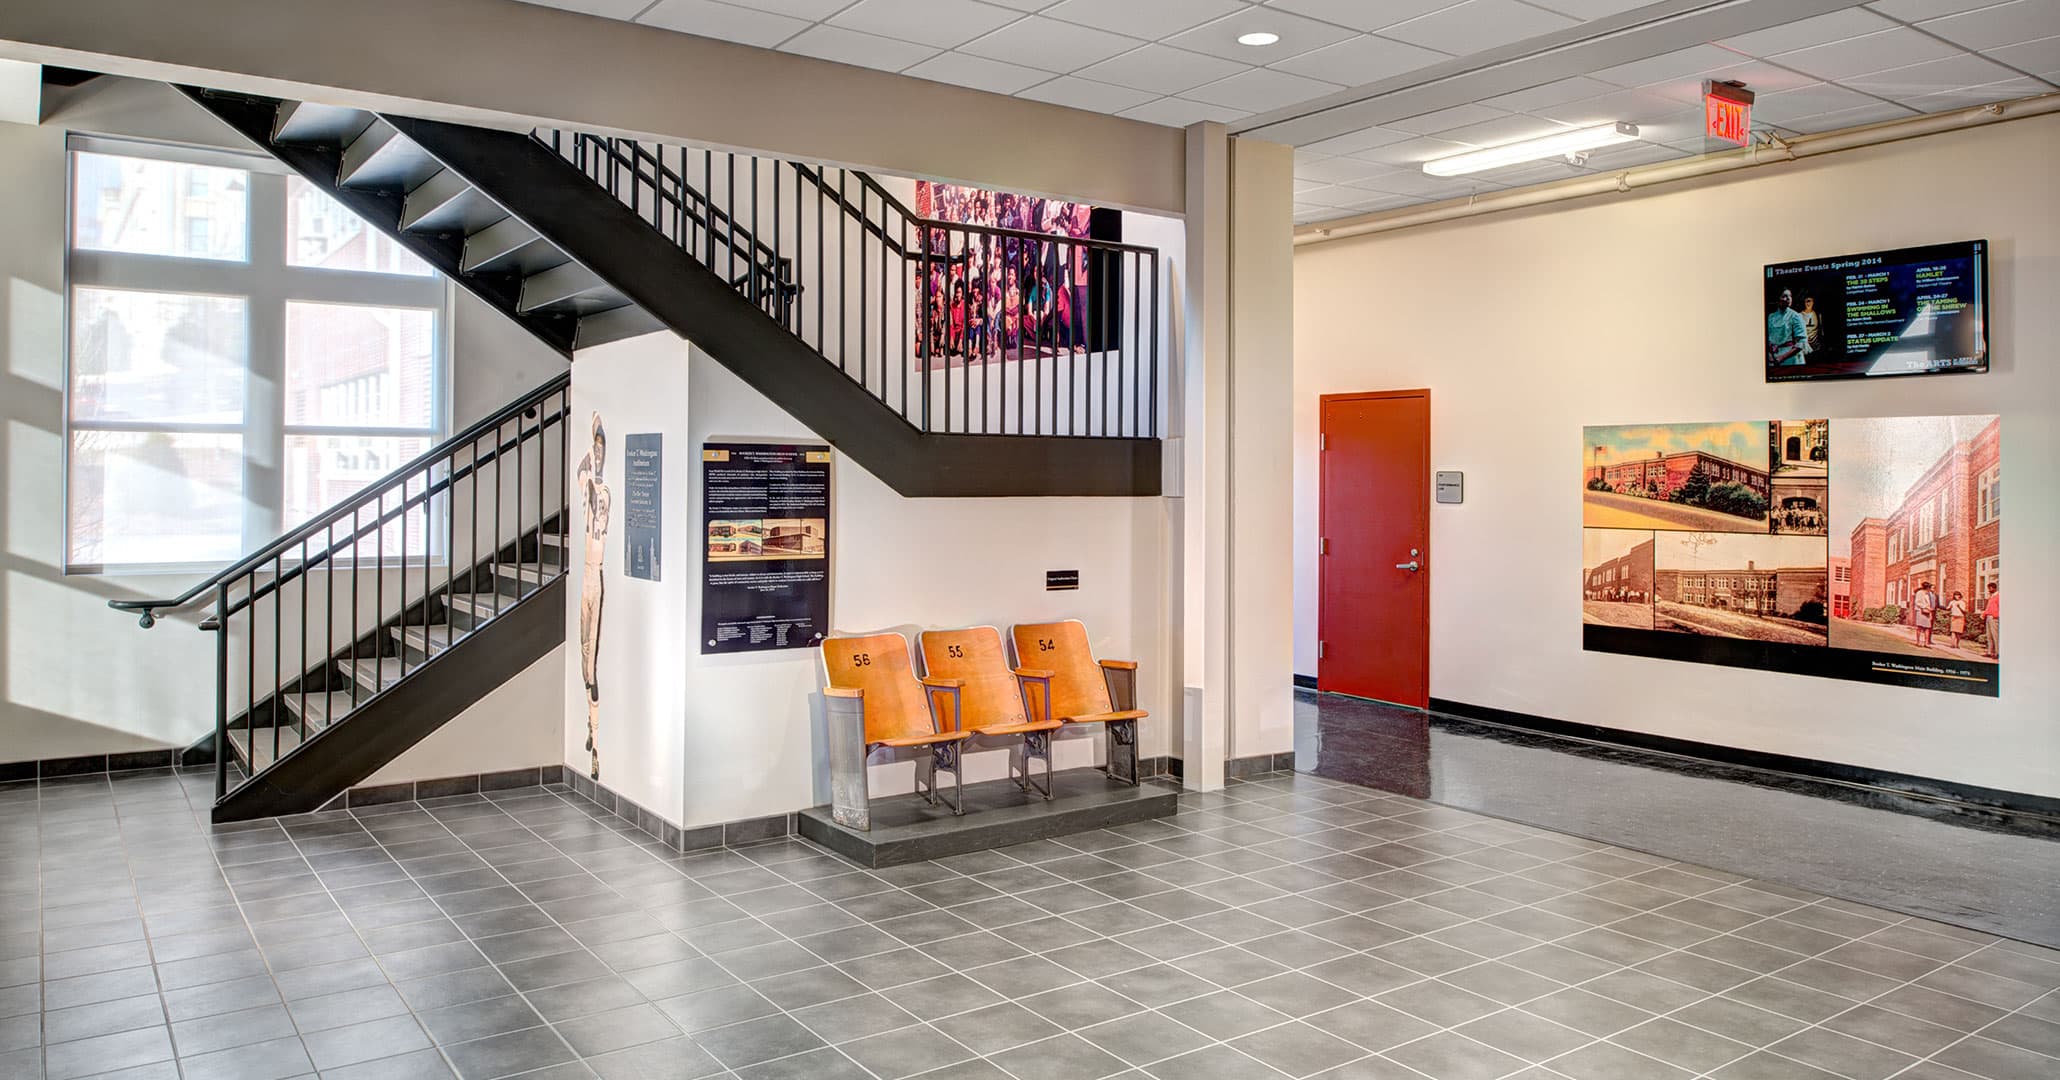 Boudreaux architects worked with the University of South Carolina to renovate and improve Booker T Washington High School.